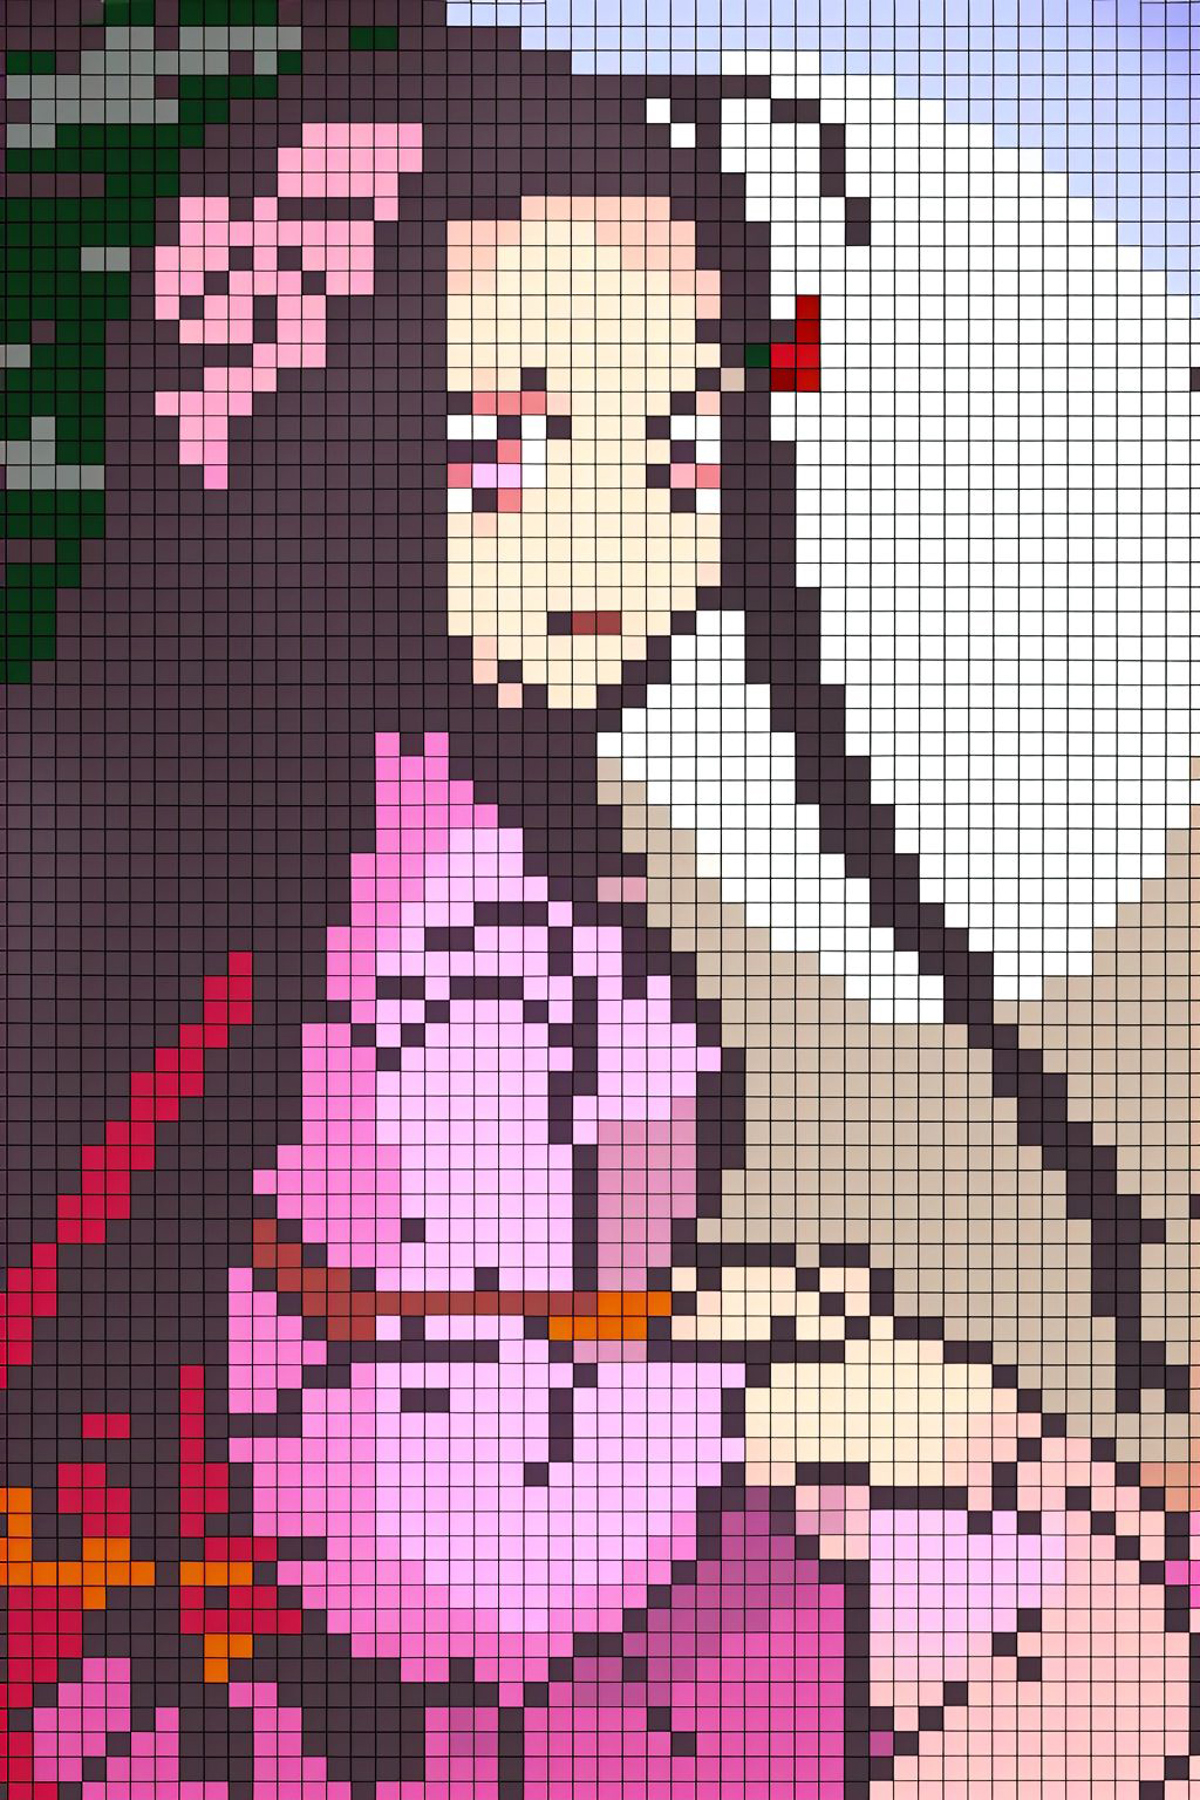 Pixel Art Grid image by PANyZHAL